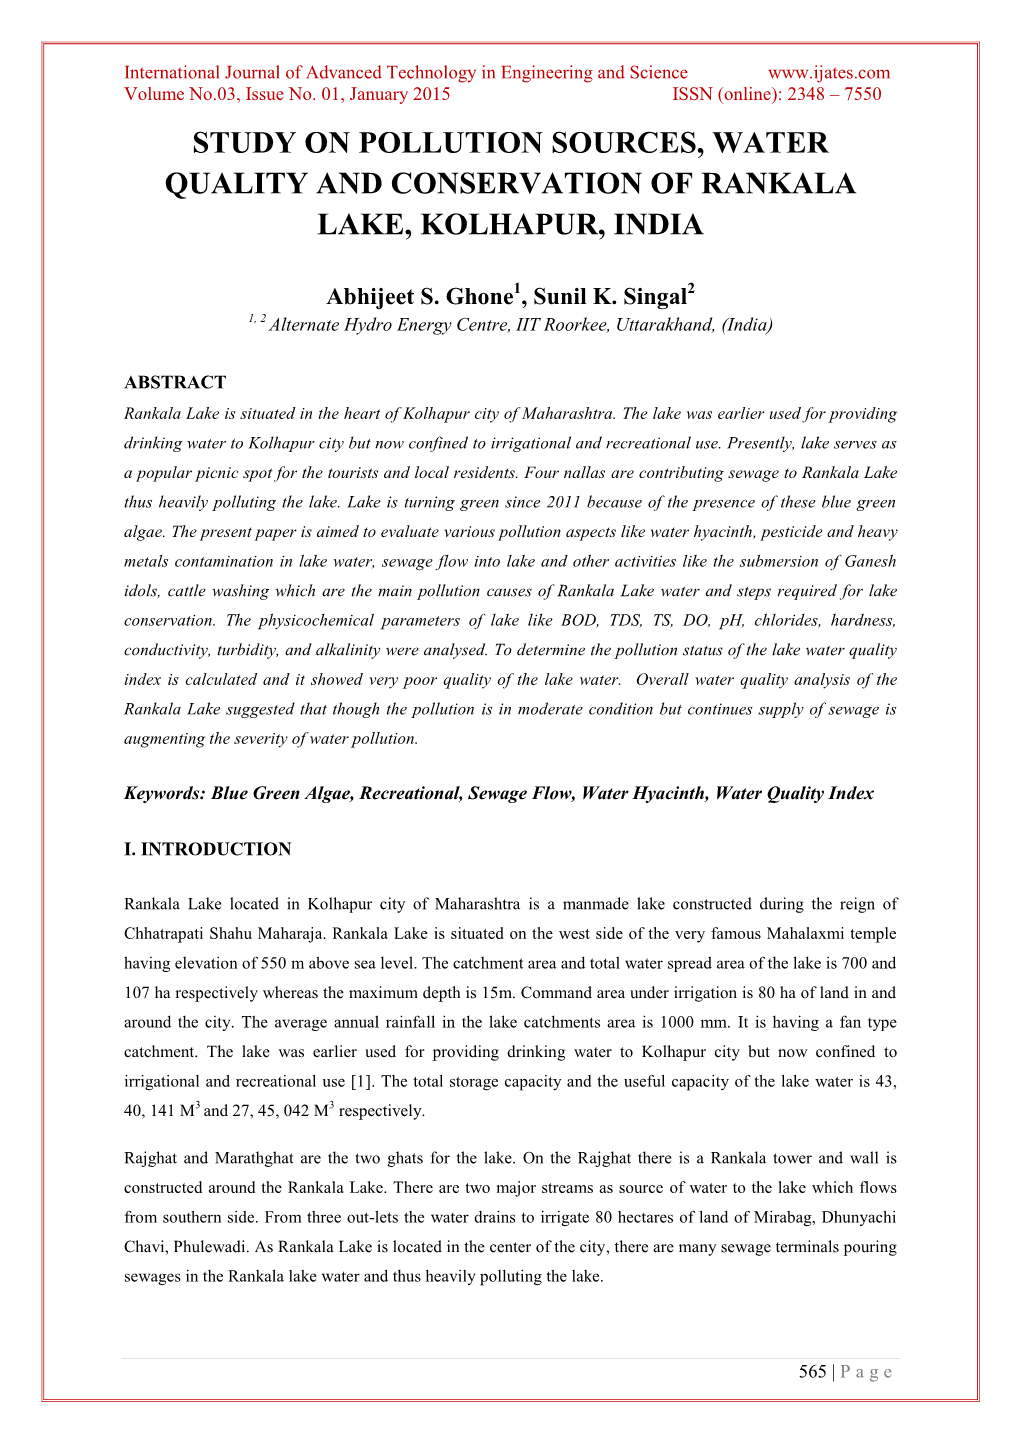 Study on Pollution Sources, Water Quality and Conservation of Rankala Lake, Kolhapur, India